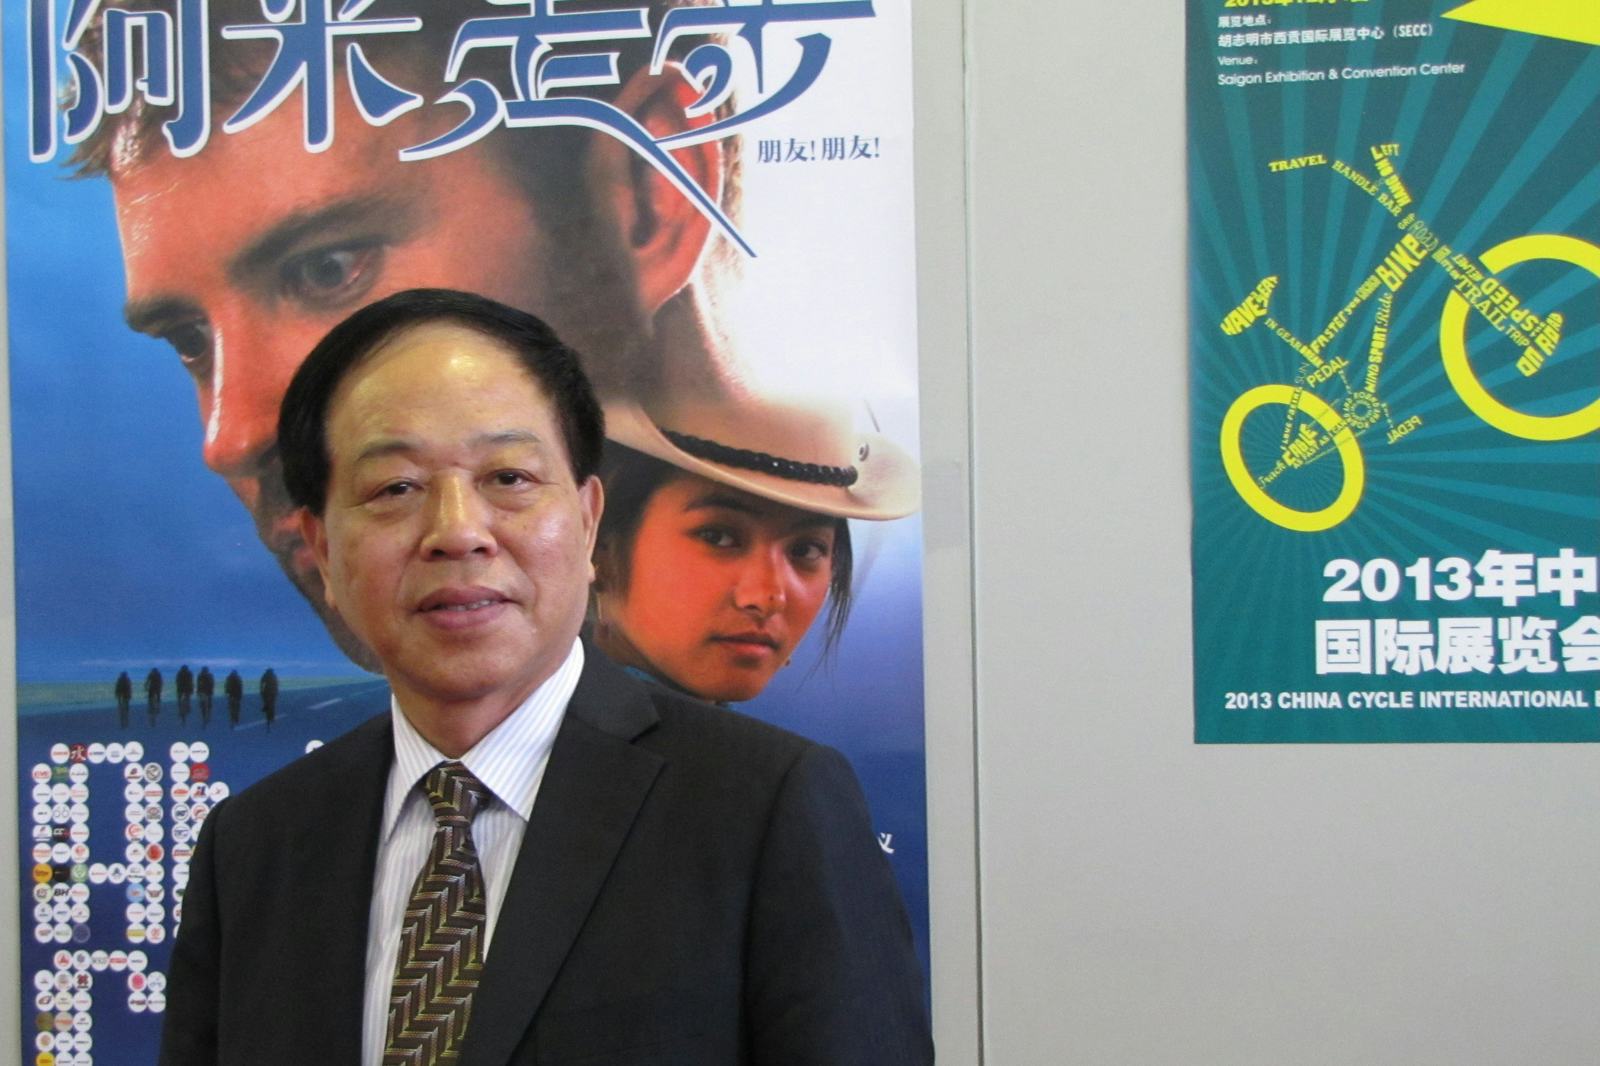 A delegation from Europe is to meet China Bicycle Association Chairman Ma Zhongchao (photo) for “enhancement of quality standards for bicycles and e-bikes on a common basis.” – Photo Bike Europe